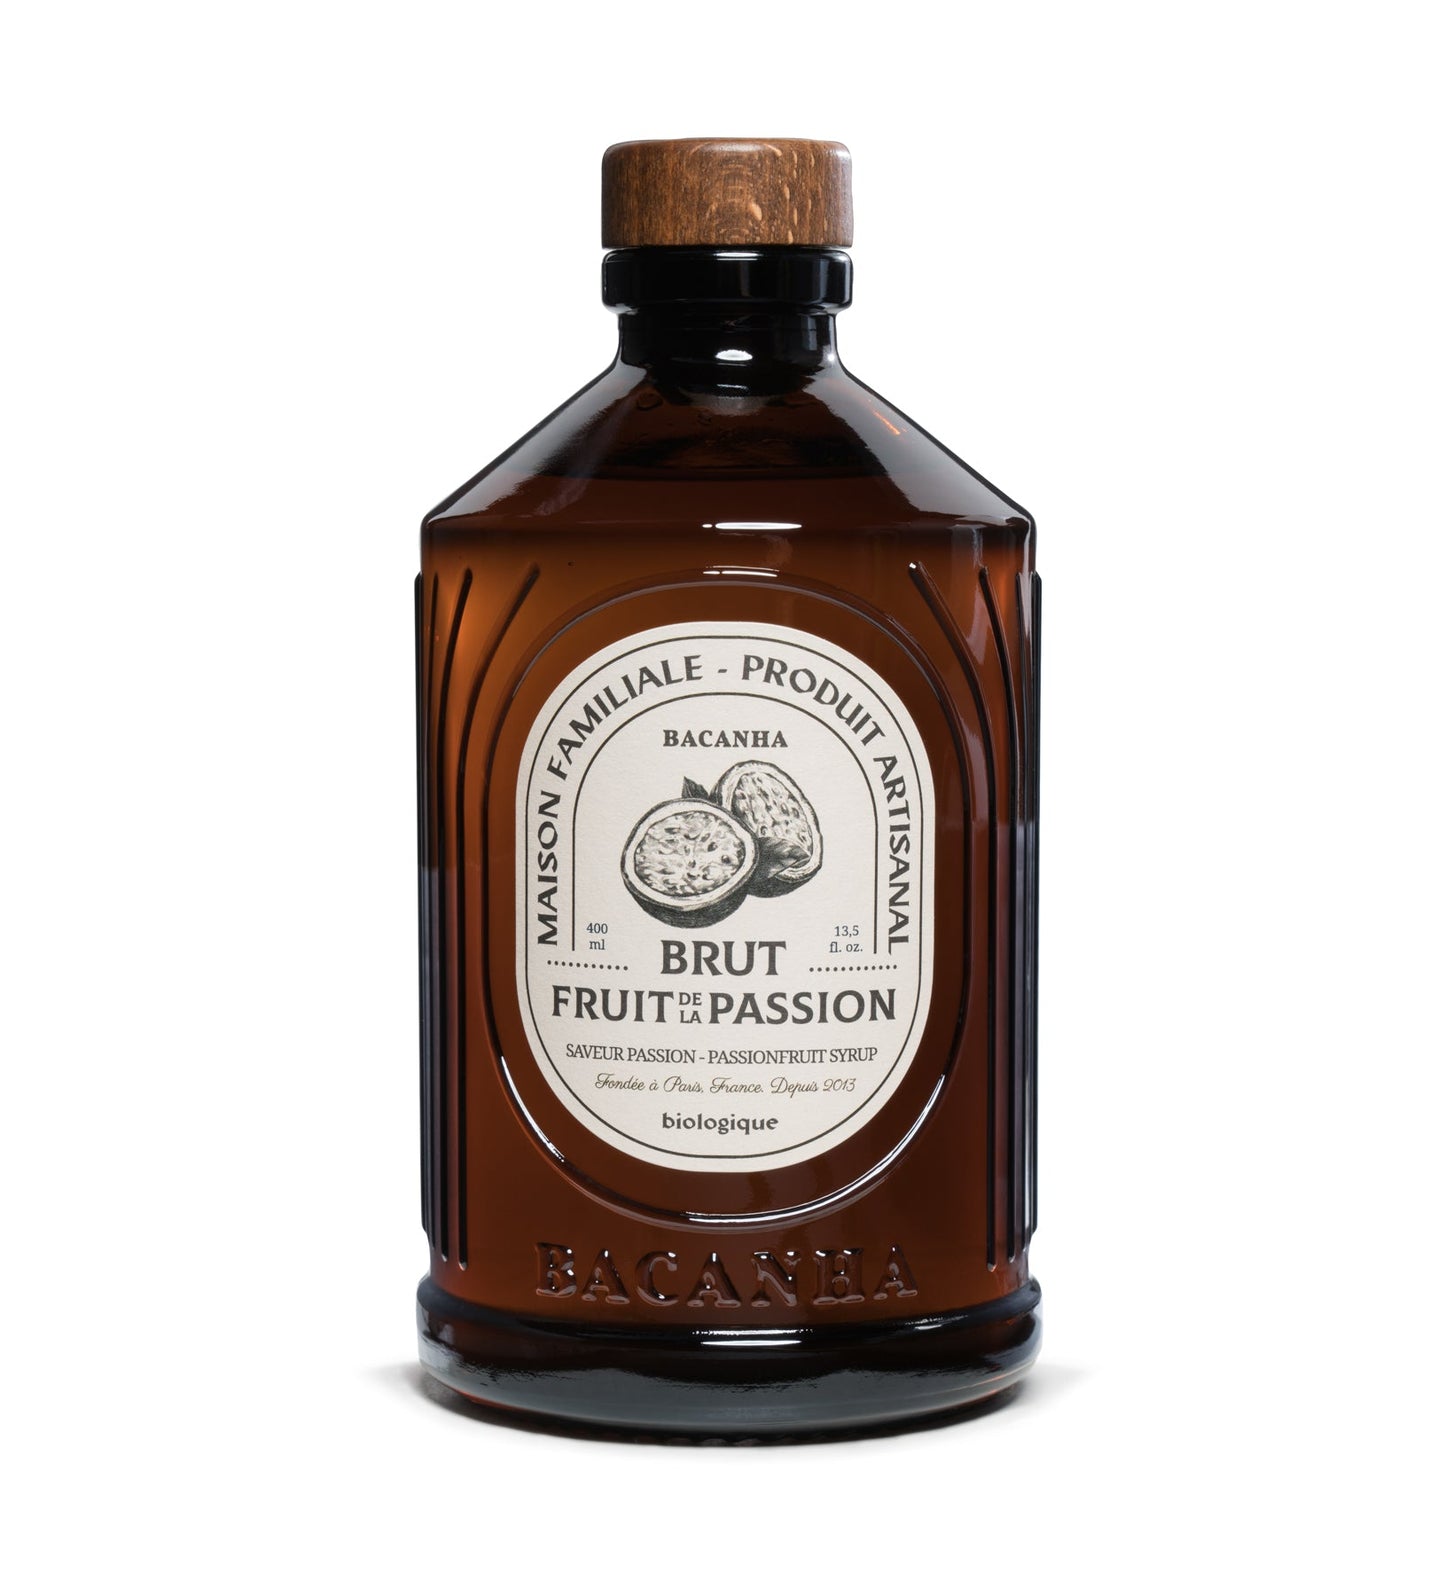 Bacanha Passion Fruit flavored syrup [ORGANIC]